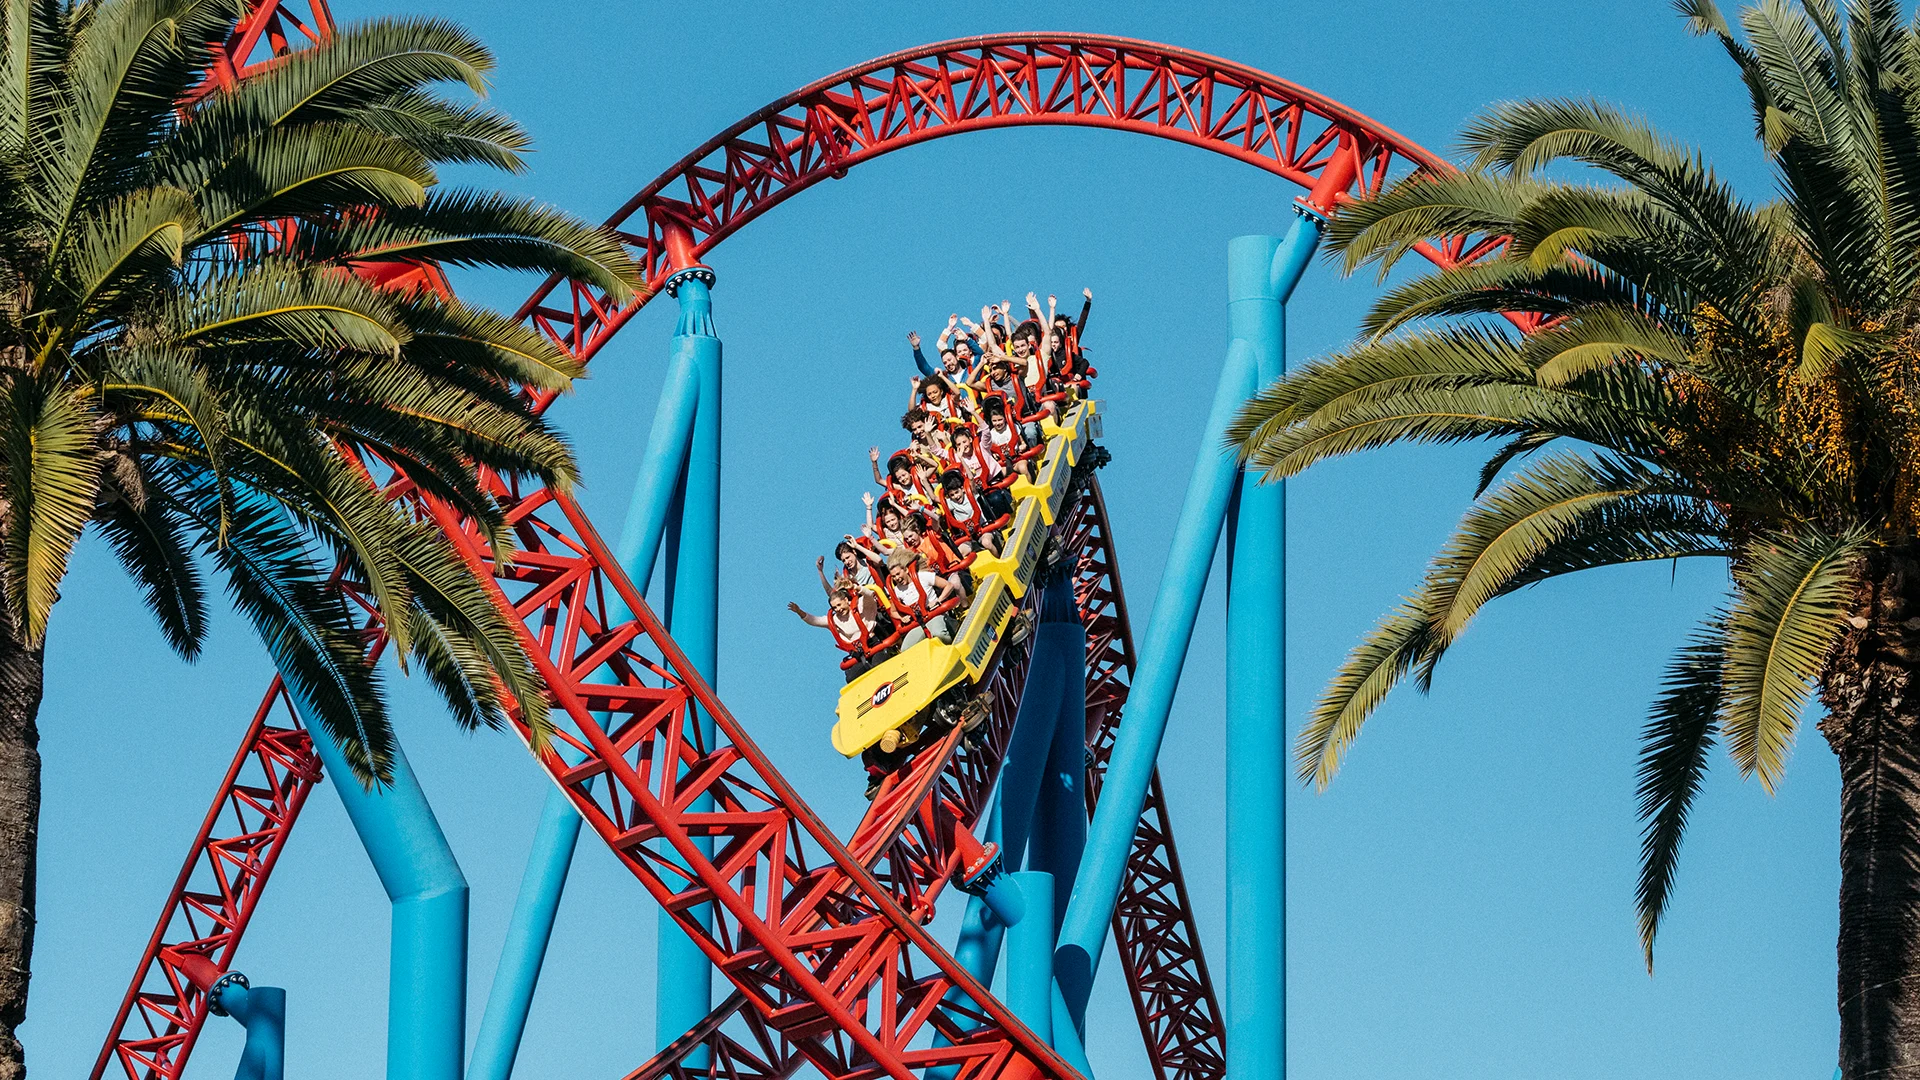 People riding a roller coaster with red tracks and blue supports, surrounded by palm trees under a clear blue sky.